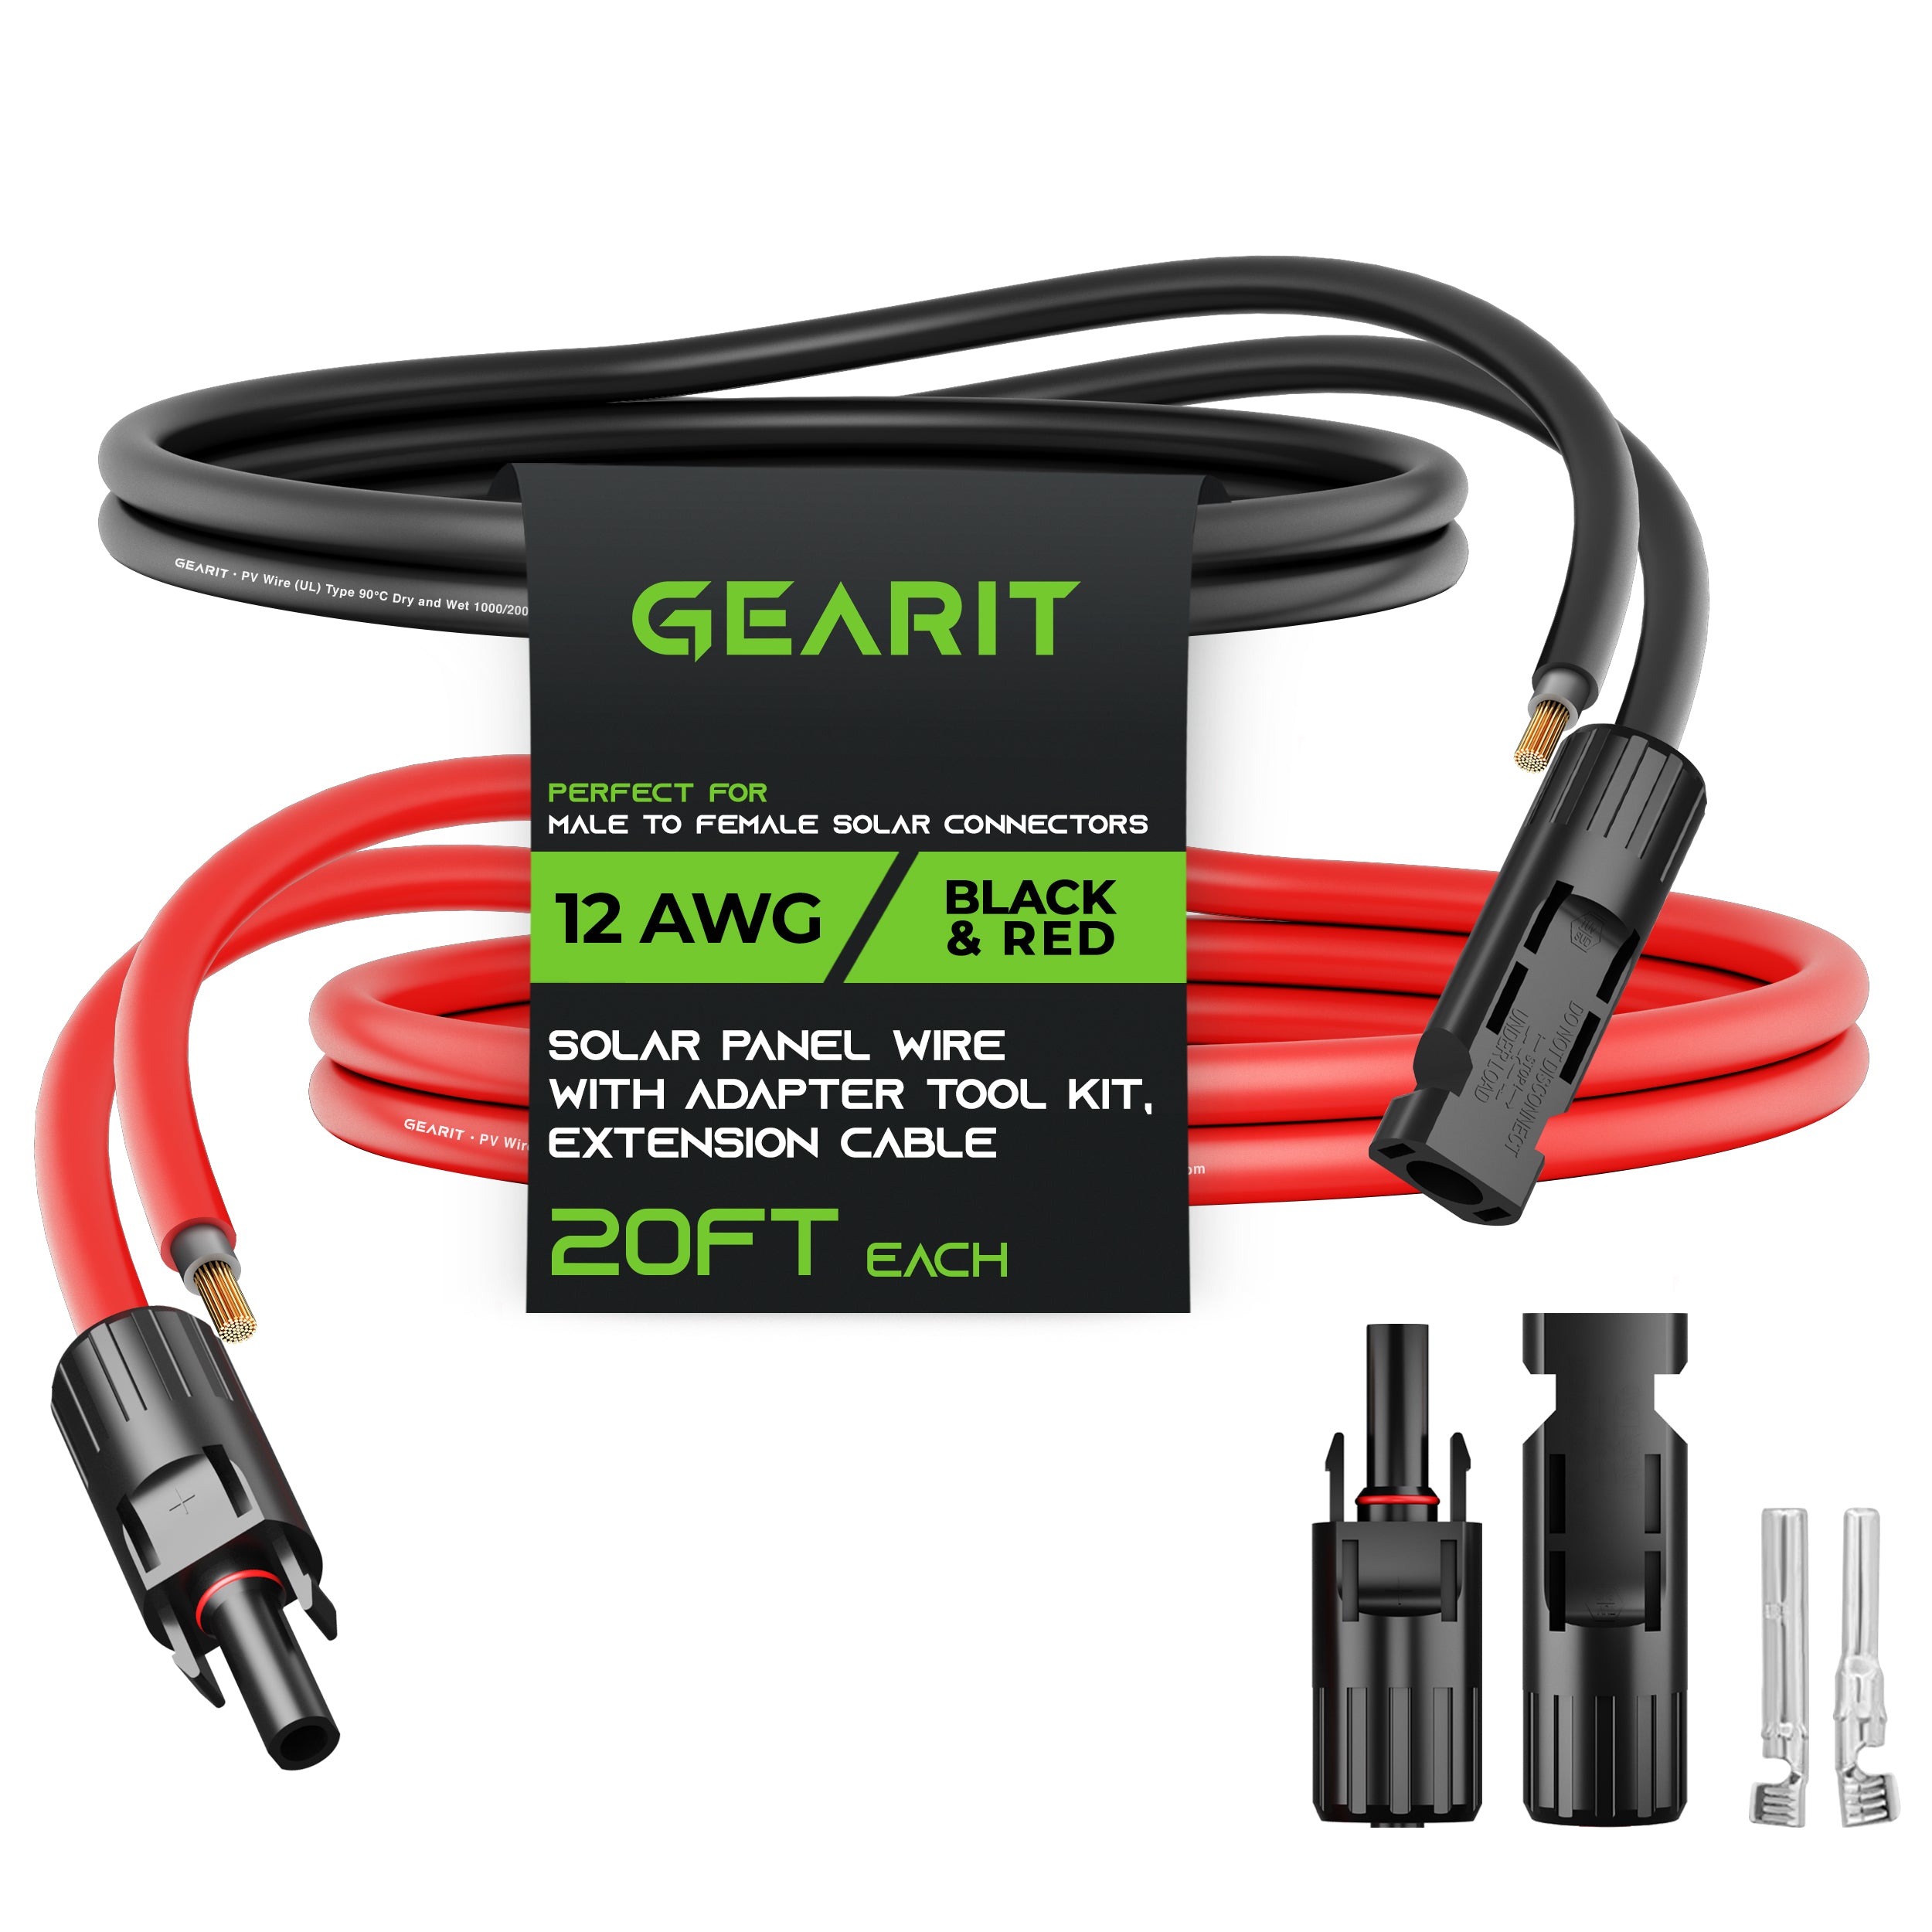 GearIT 12AWG Solar Panel Extension Cable - Solar Panel Wire with Adapt